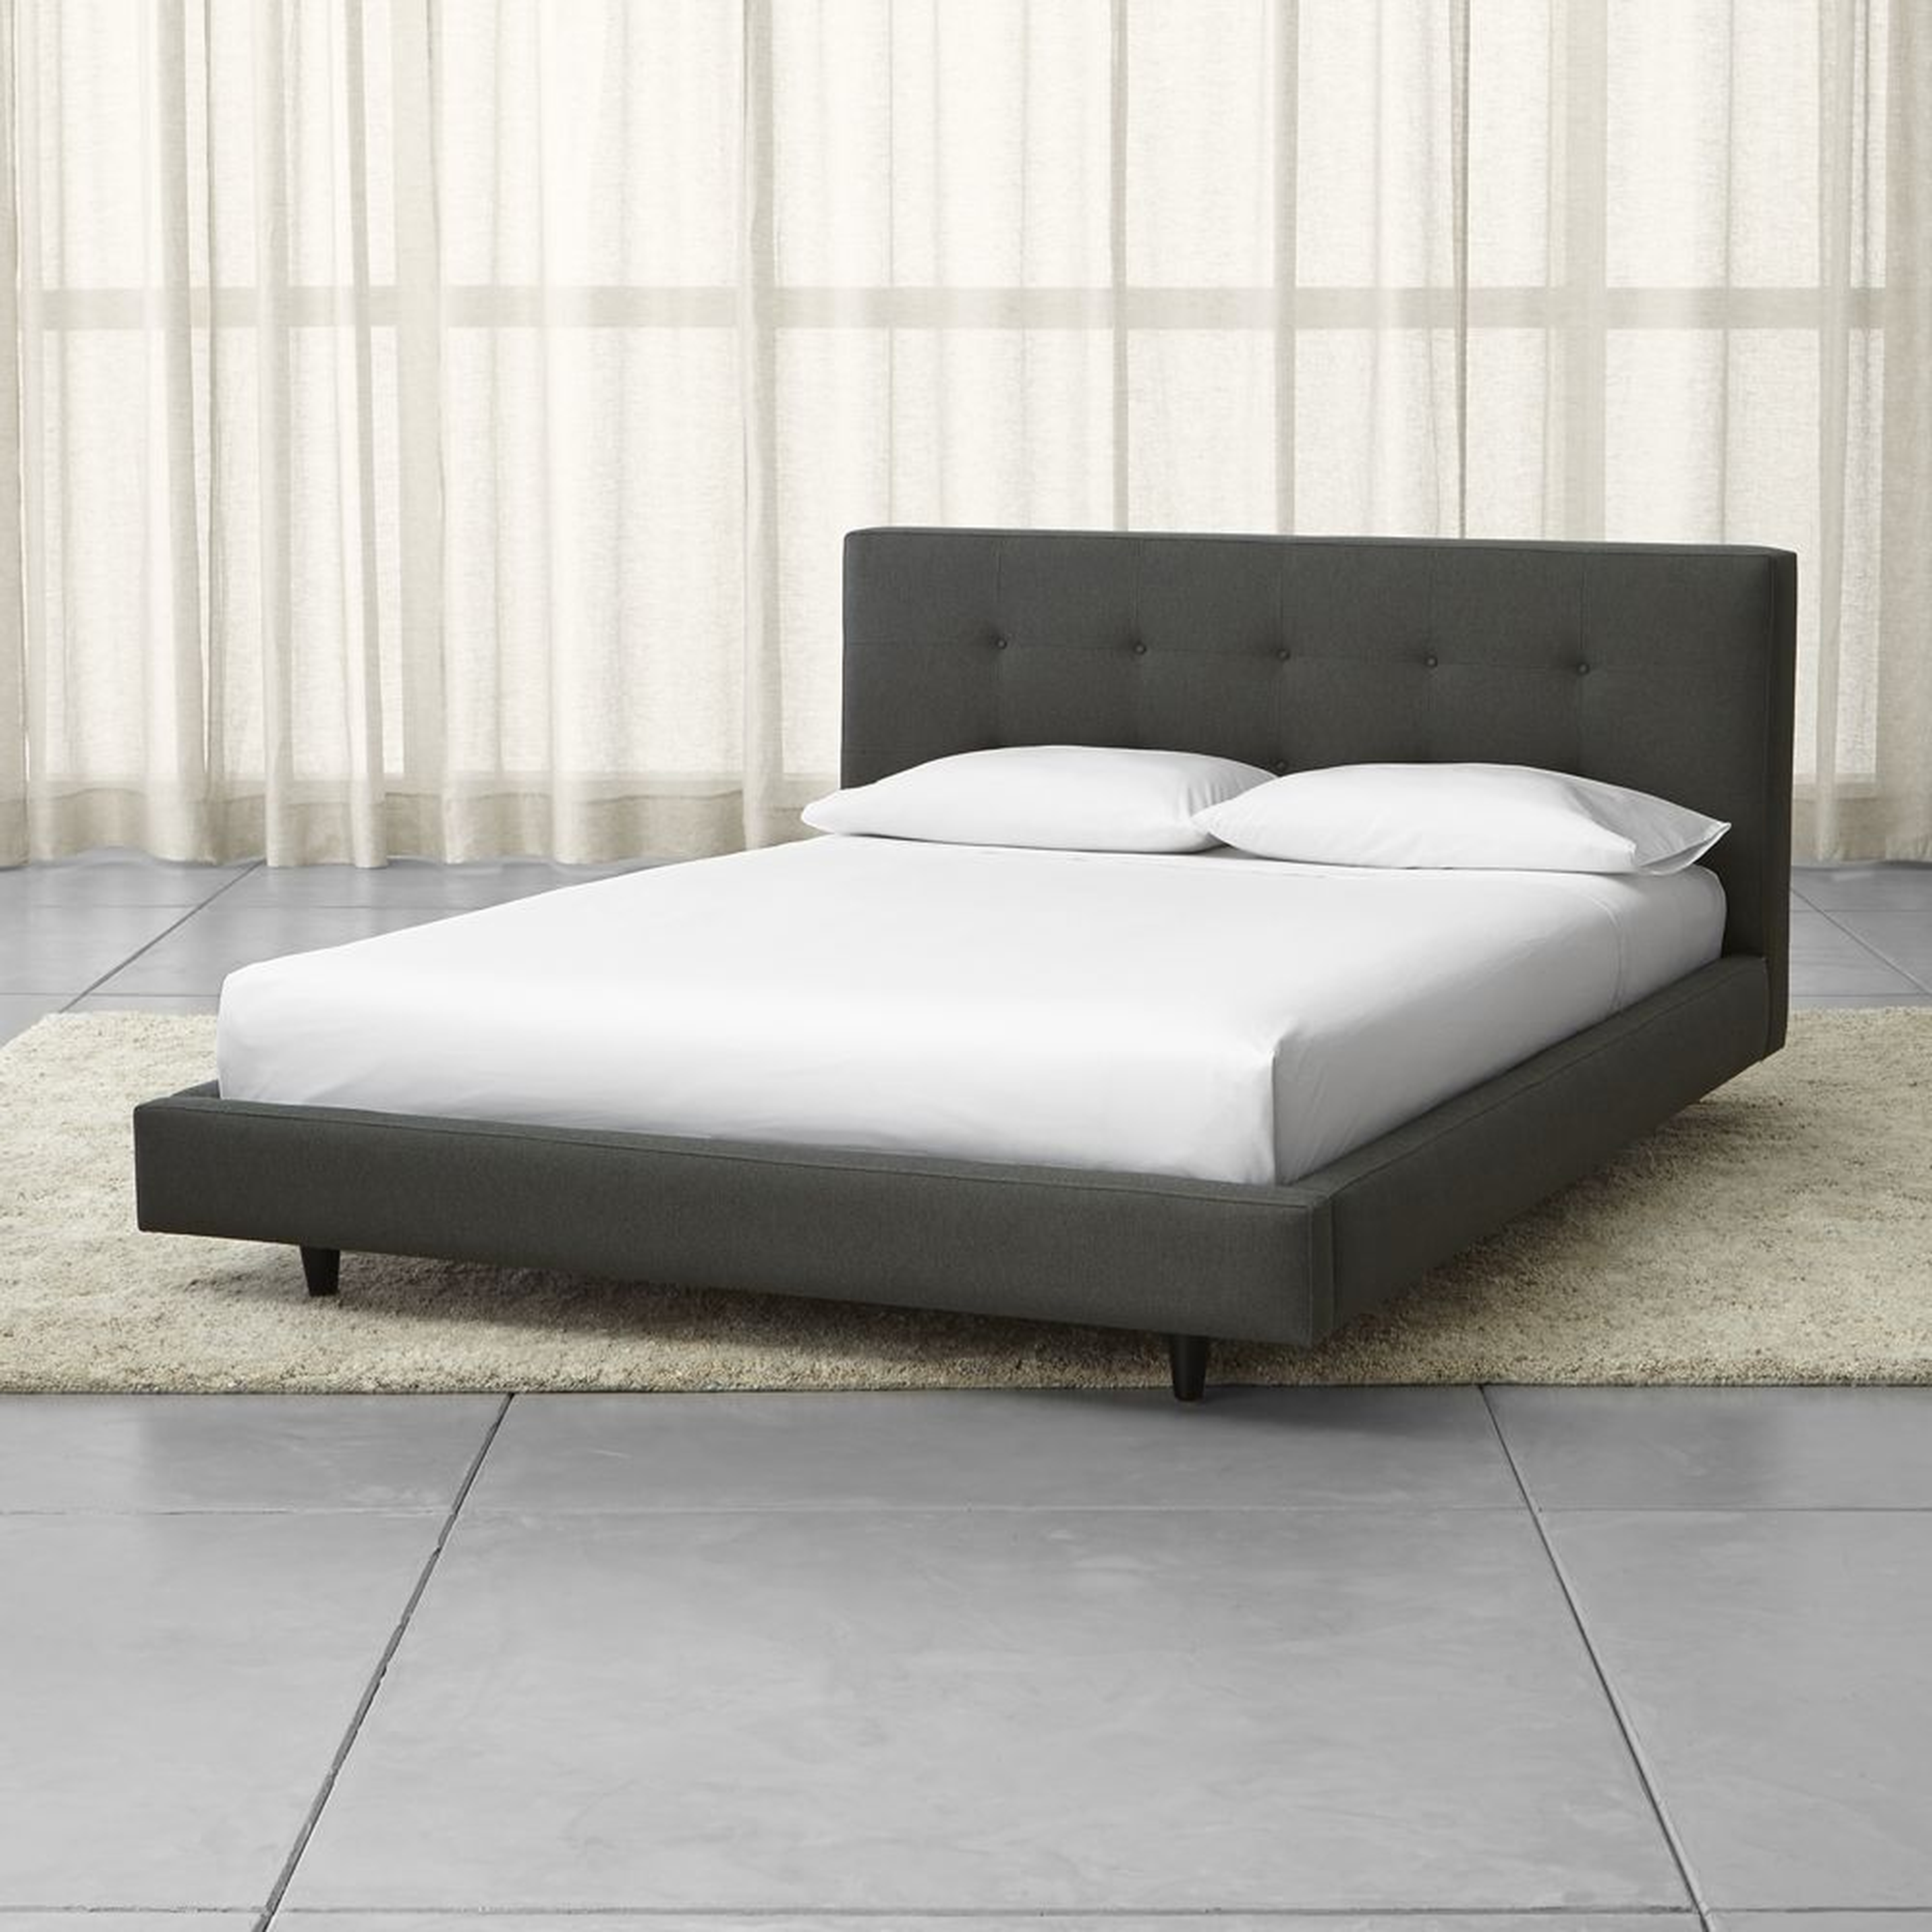 Tate Queen Upholstered Bed 38" - Winslow, Charcoal - Leg:Deco - Crate and Barrel